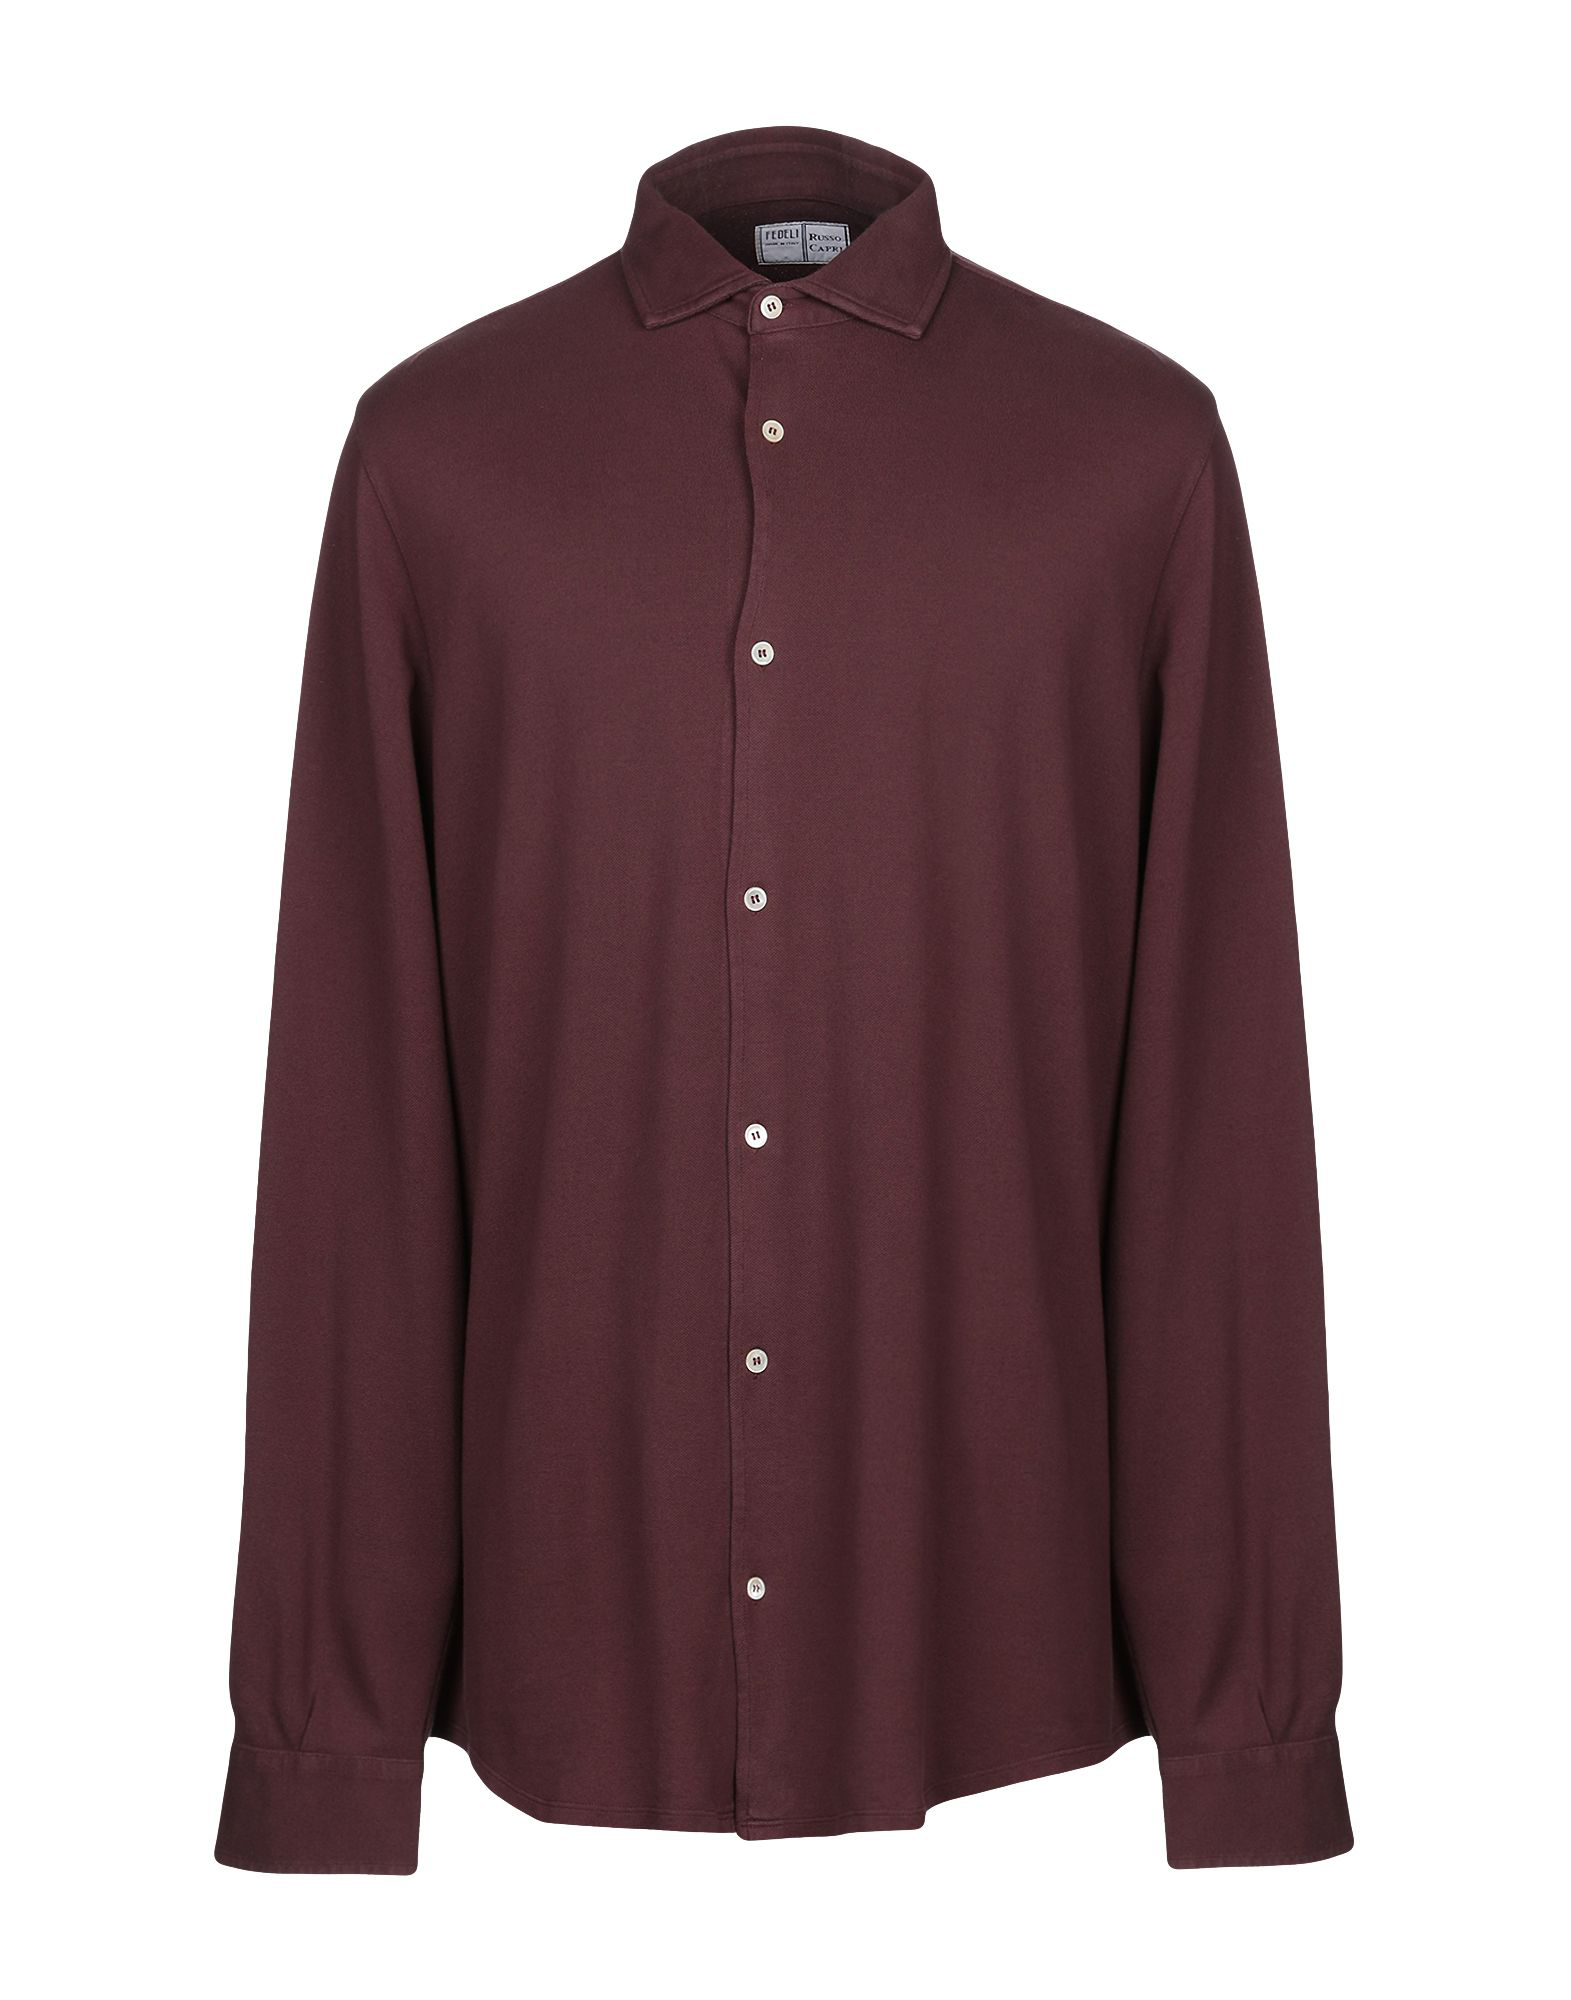 Fedeli Solid Color Shirt In Maroon | ModeSens